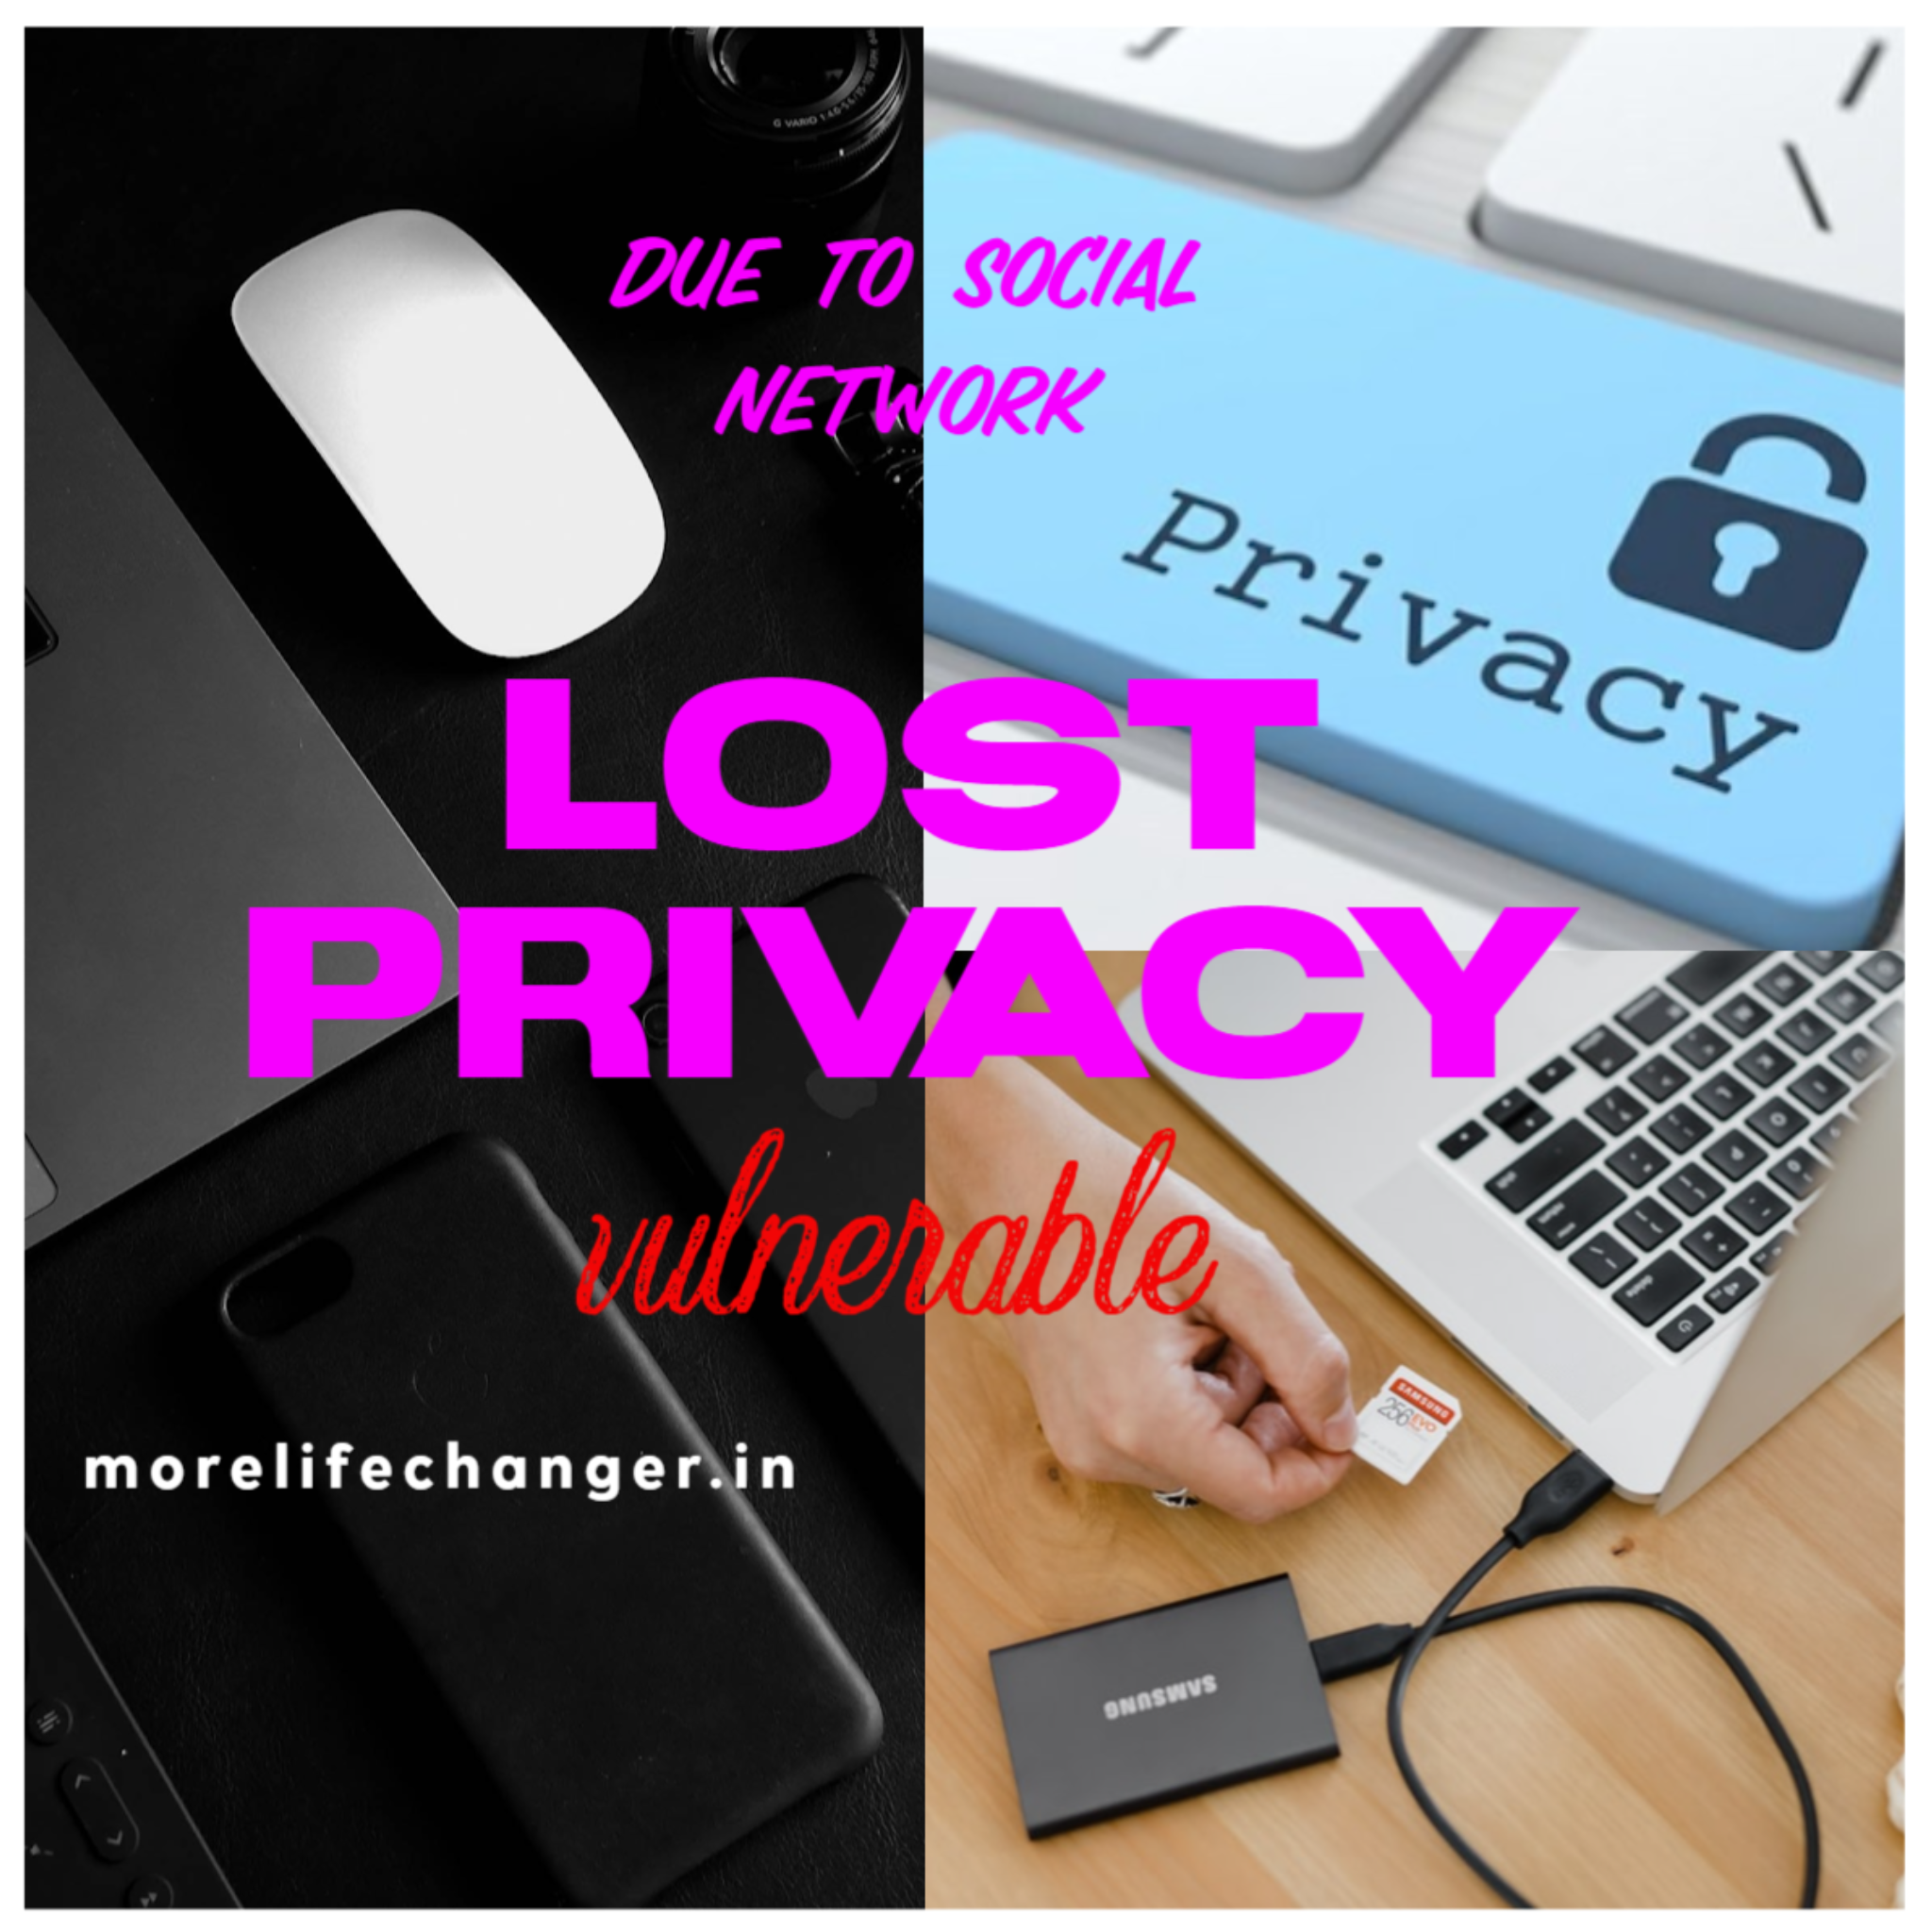 lost privacy by social network